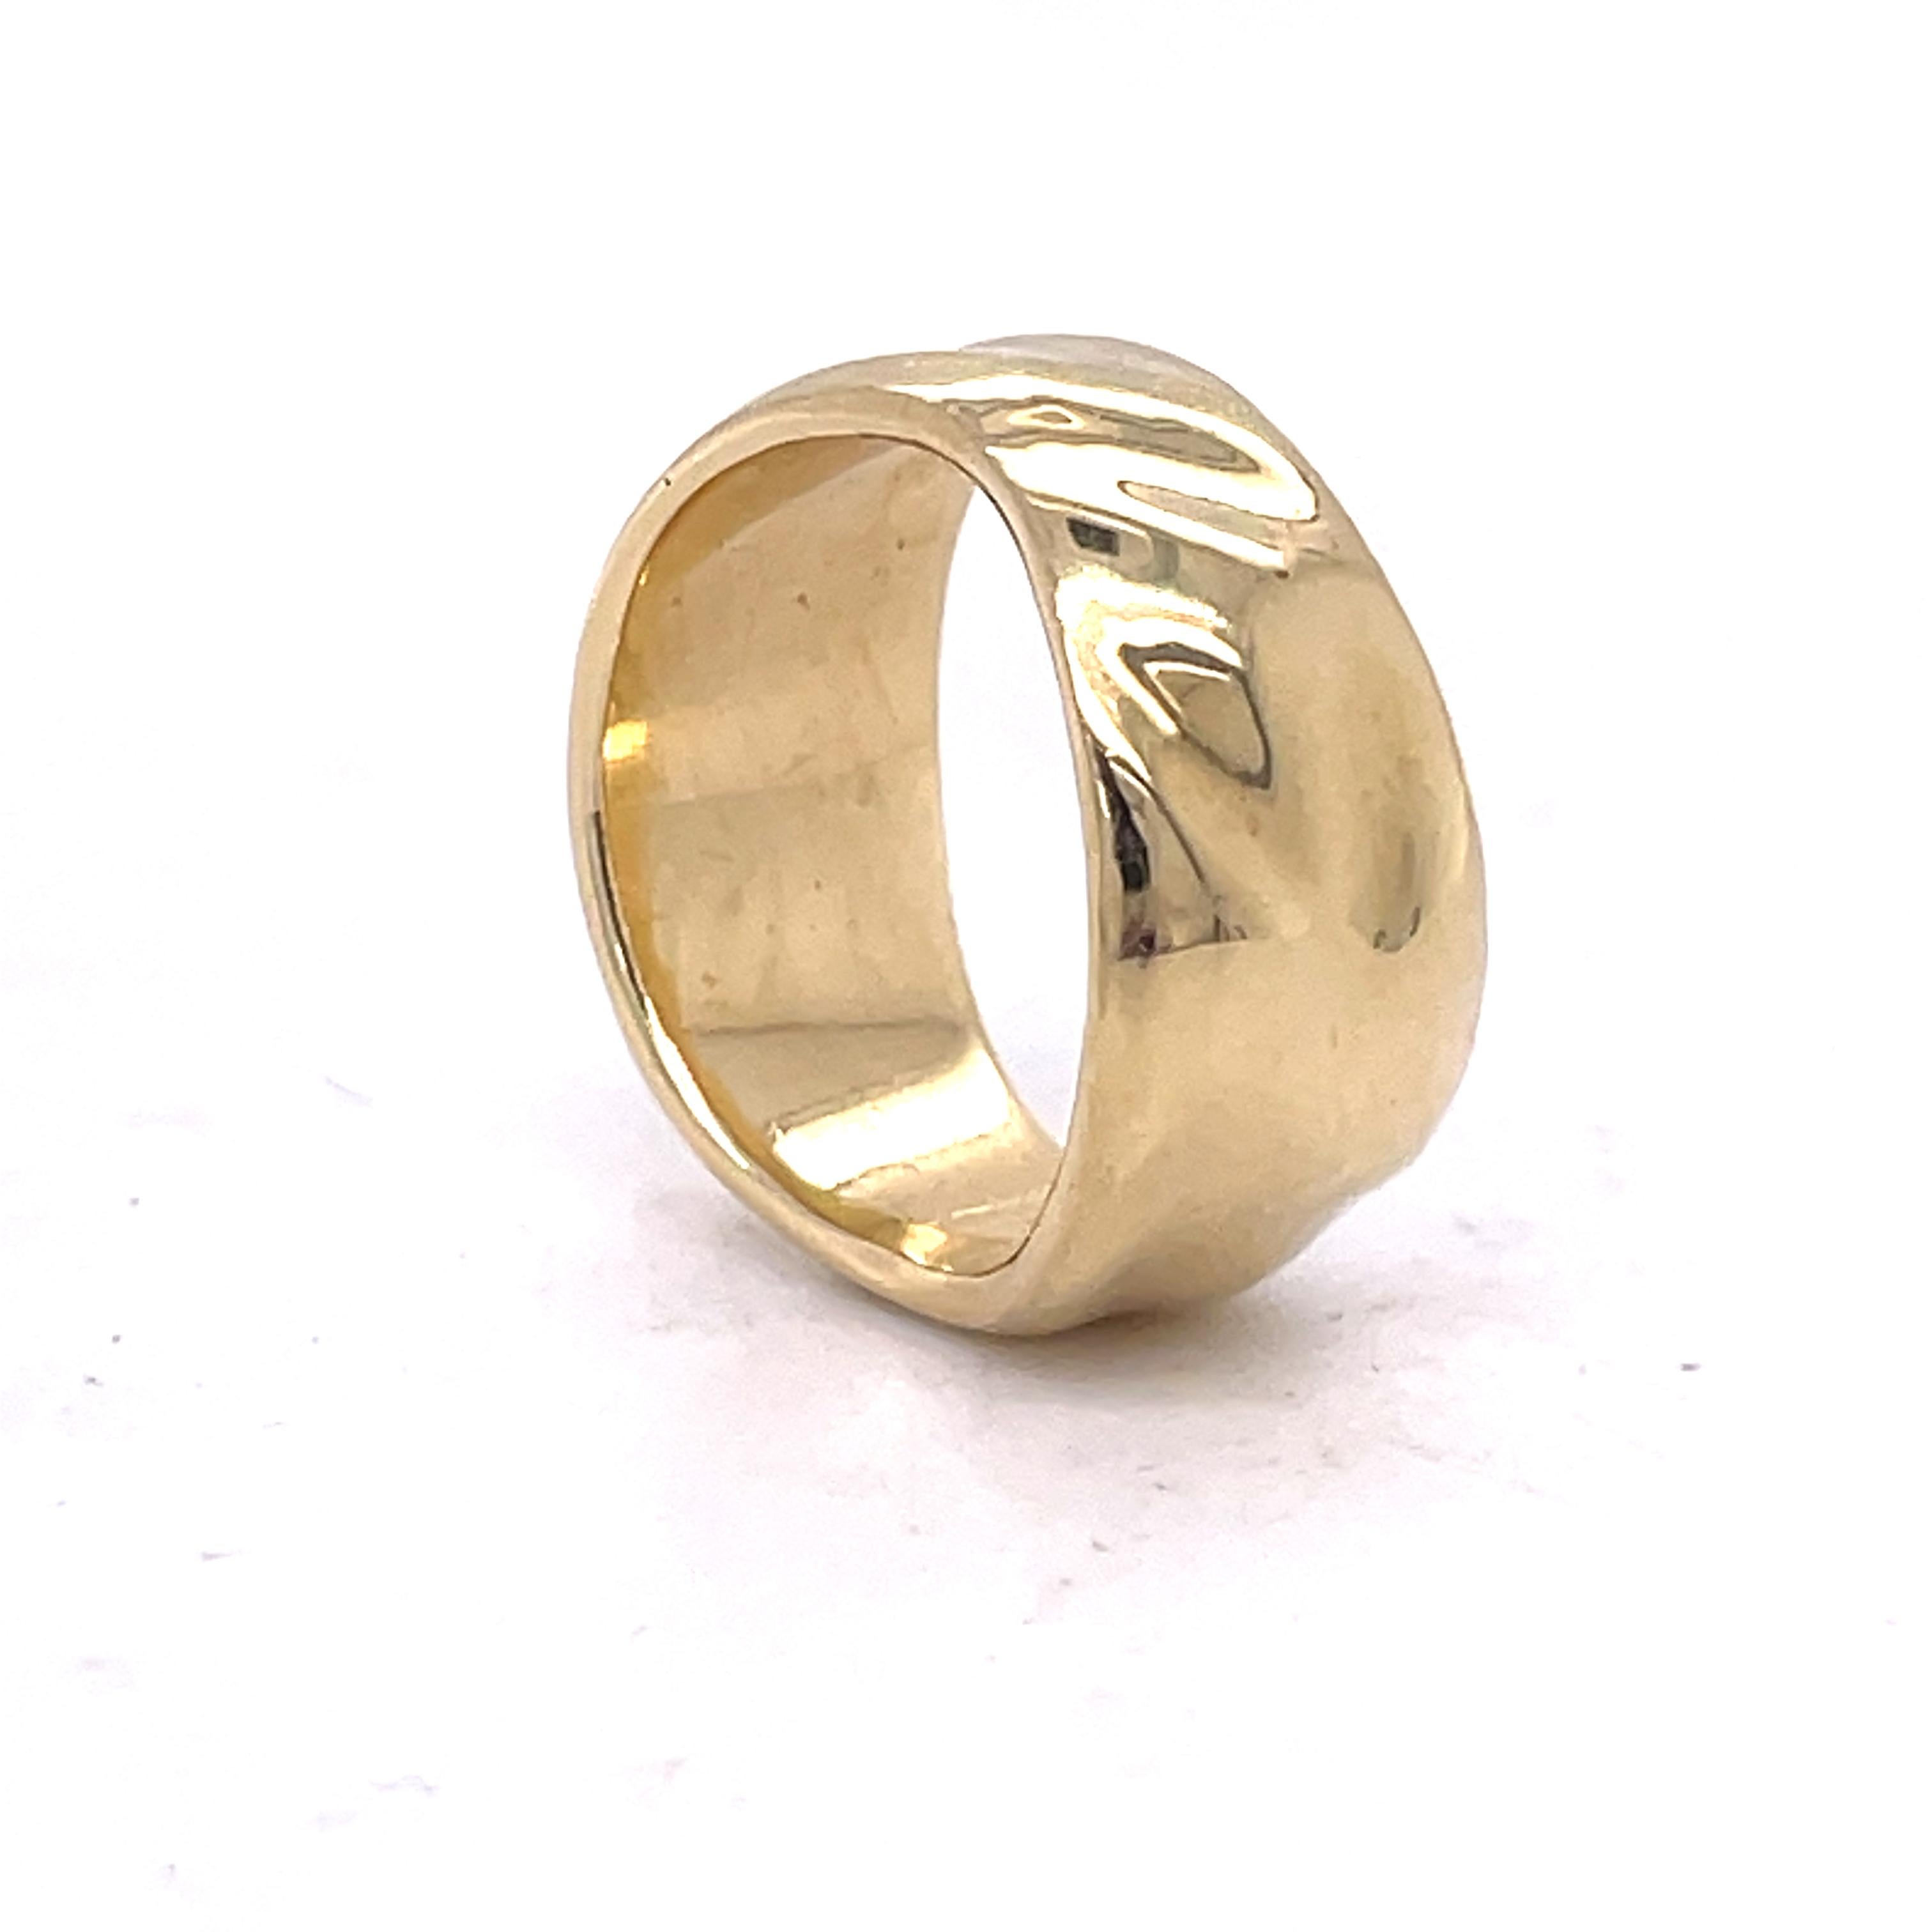 Jewelry Material: Yellow Gold 14k (the gold has been tested by a professional)

Total Metal Weight: 8g

Size:5.75 US

Condition: NEW


Feel free to contact us for inquiries and consultation and special requests.
The item will be shipped in a luxury